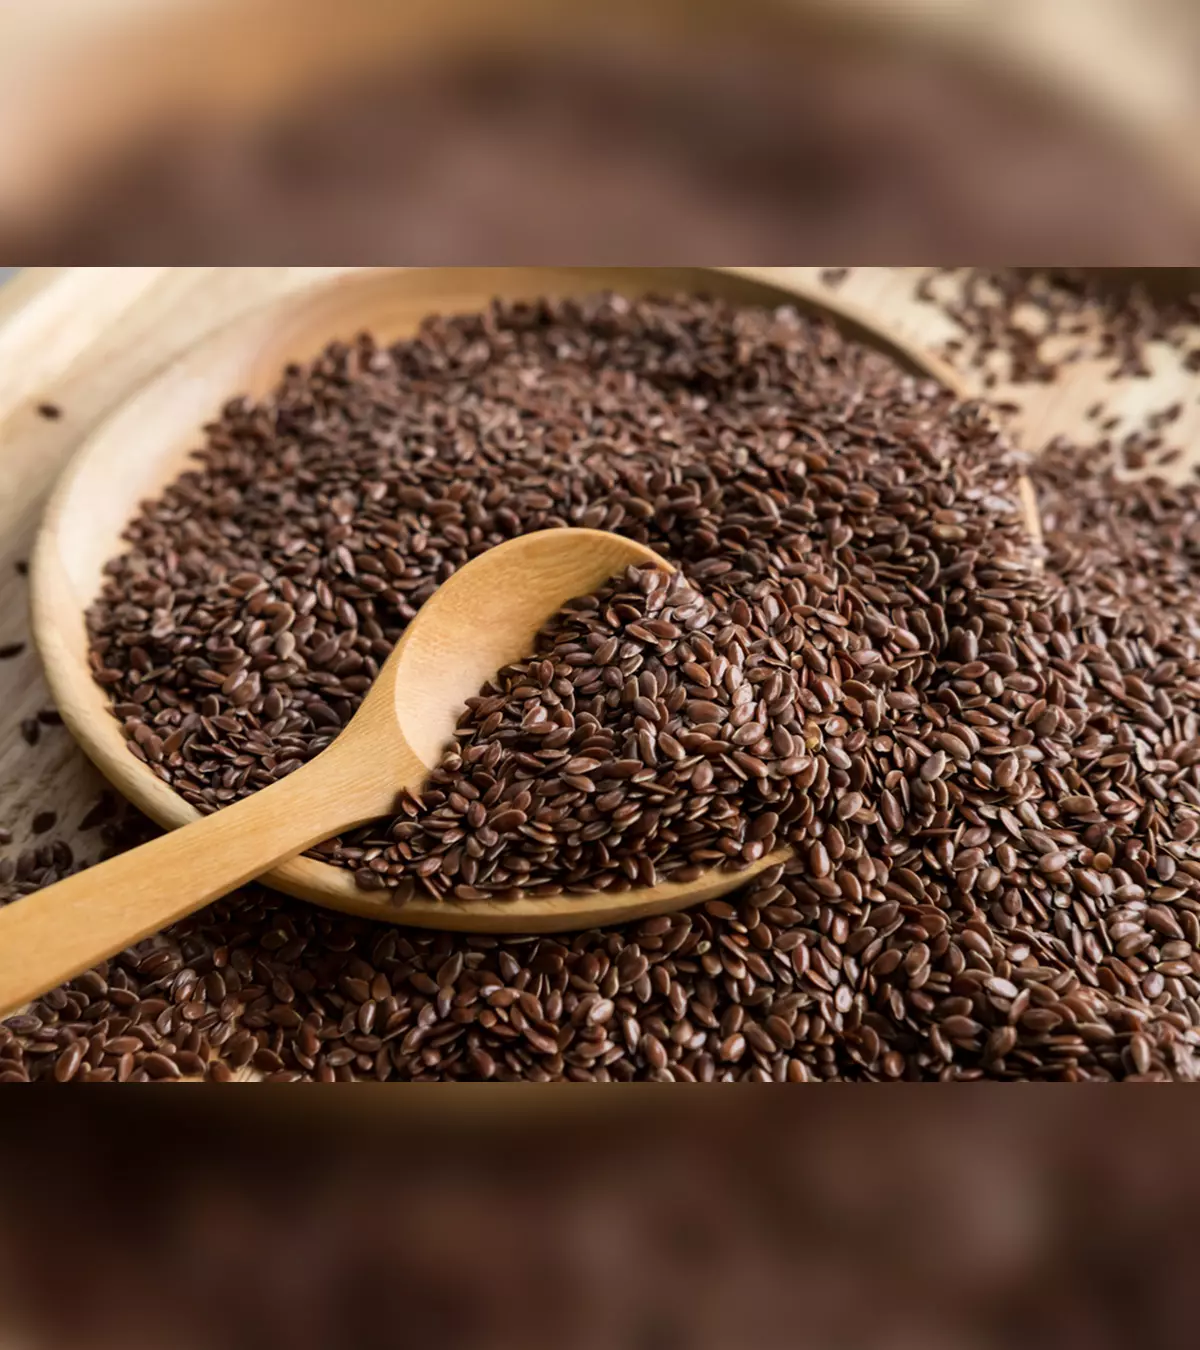 Flaxseeds provide a healthy bowel and support brain development, but use them cautiously.